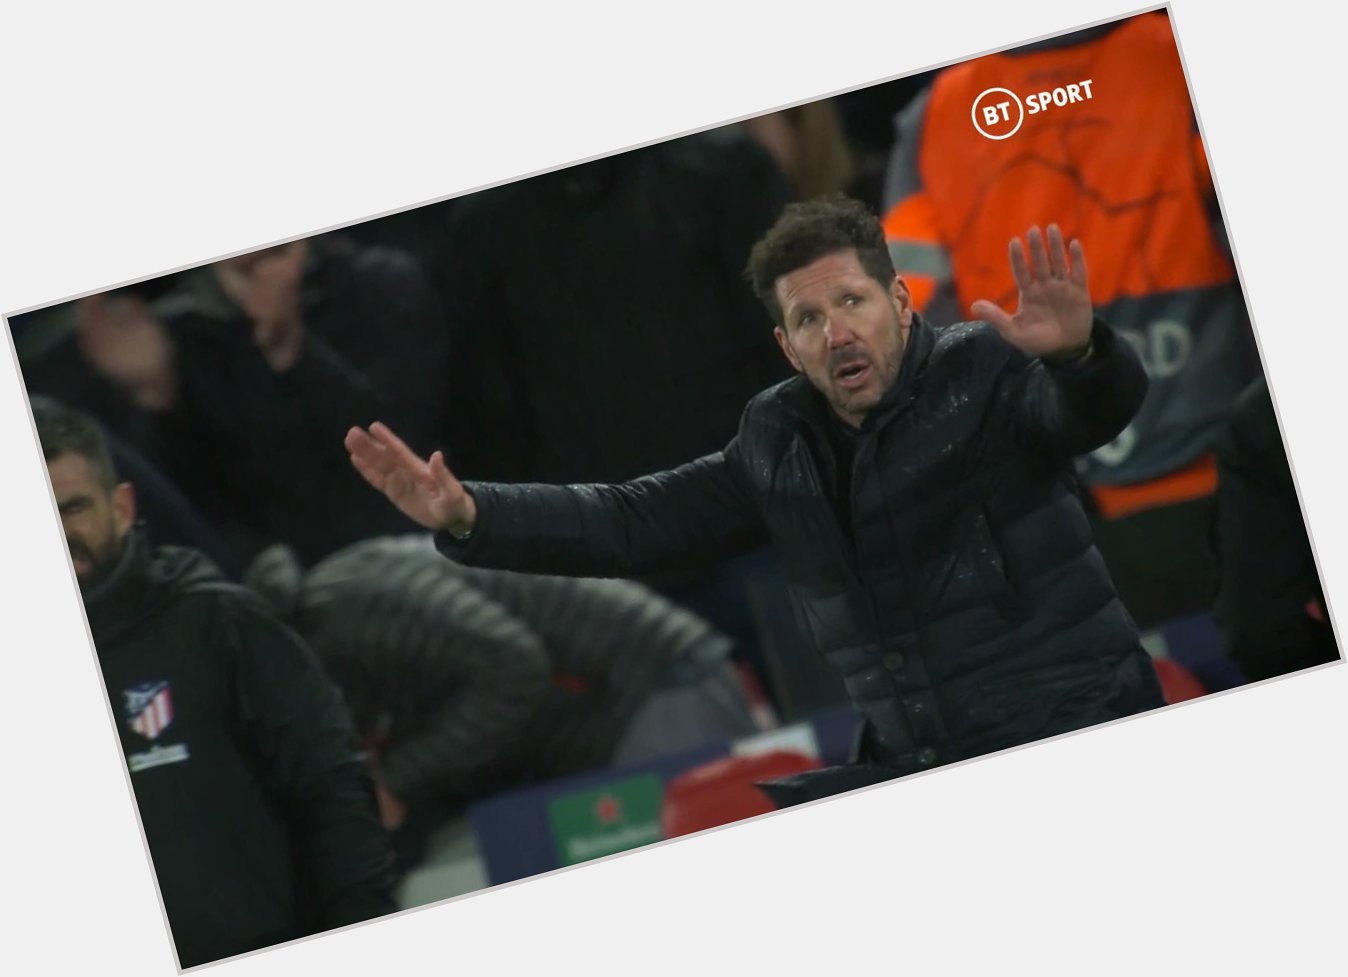 Happy birthday, Diego Simeone! The man who always gives passion on the sidelines Never change, El Cholo.

